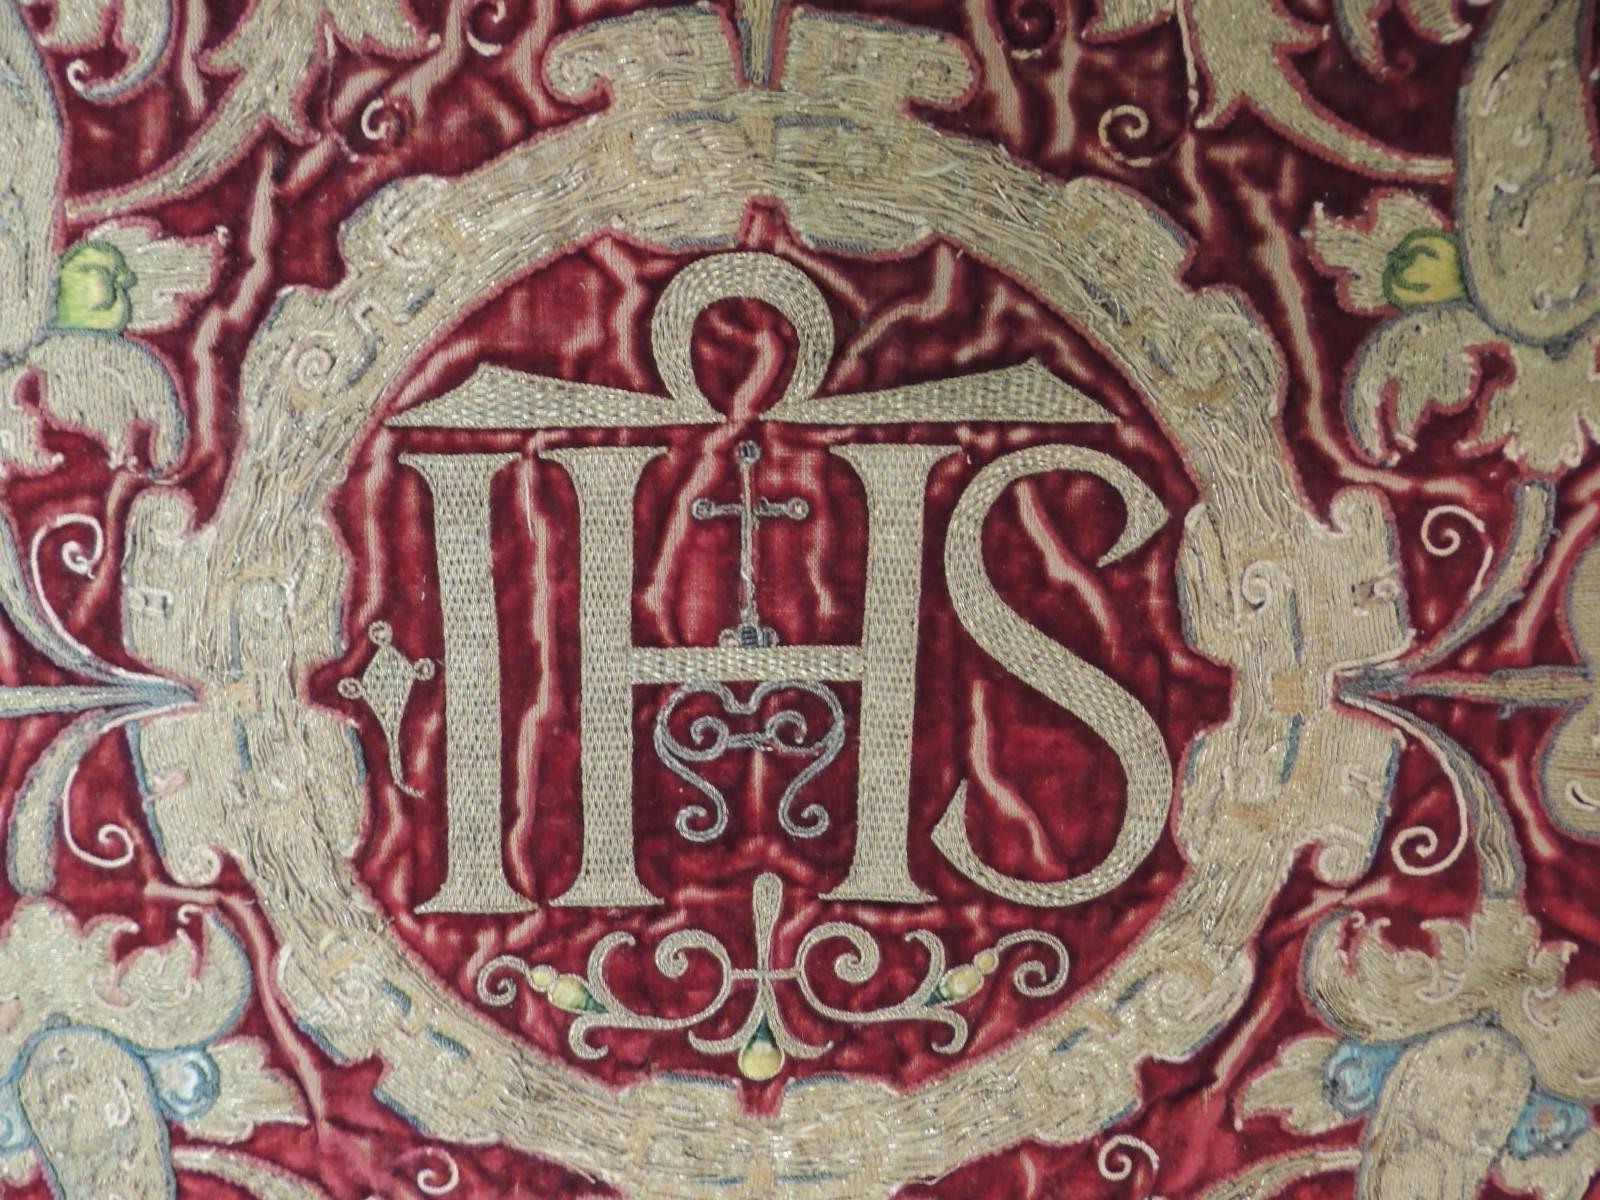 18th century Italian Ecclesiastical gold embroidered on silk velvet panel.
18th century ecclesiastical Italian gold embroidered on silk velvet panel inscribed with letters S.H.I. in the center with a cross and framed with a round medallion of